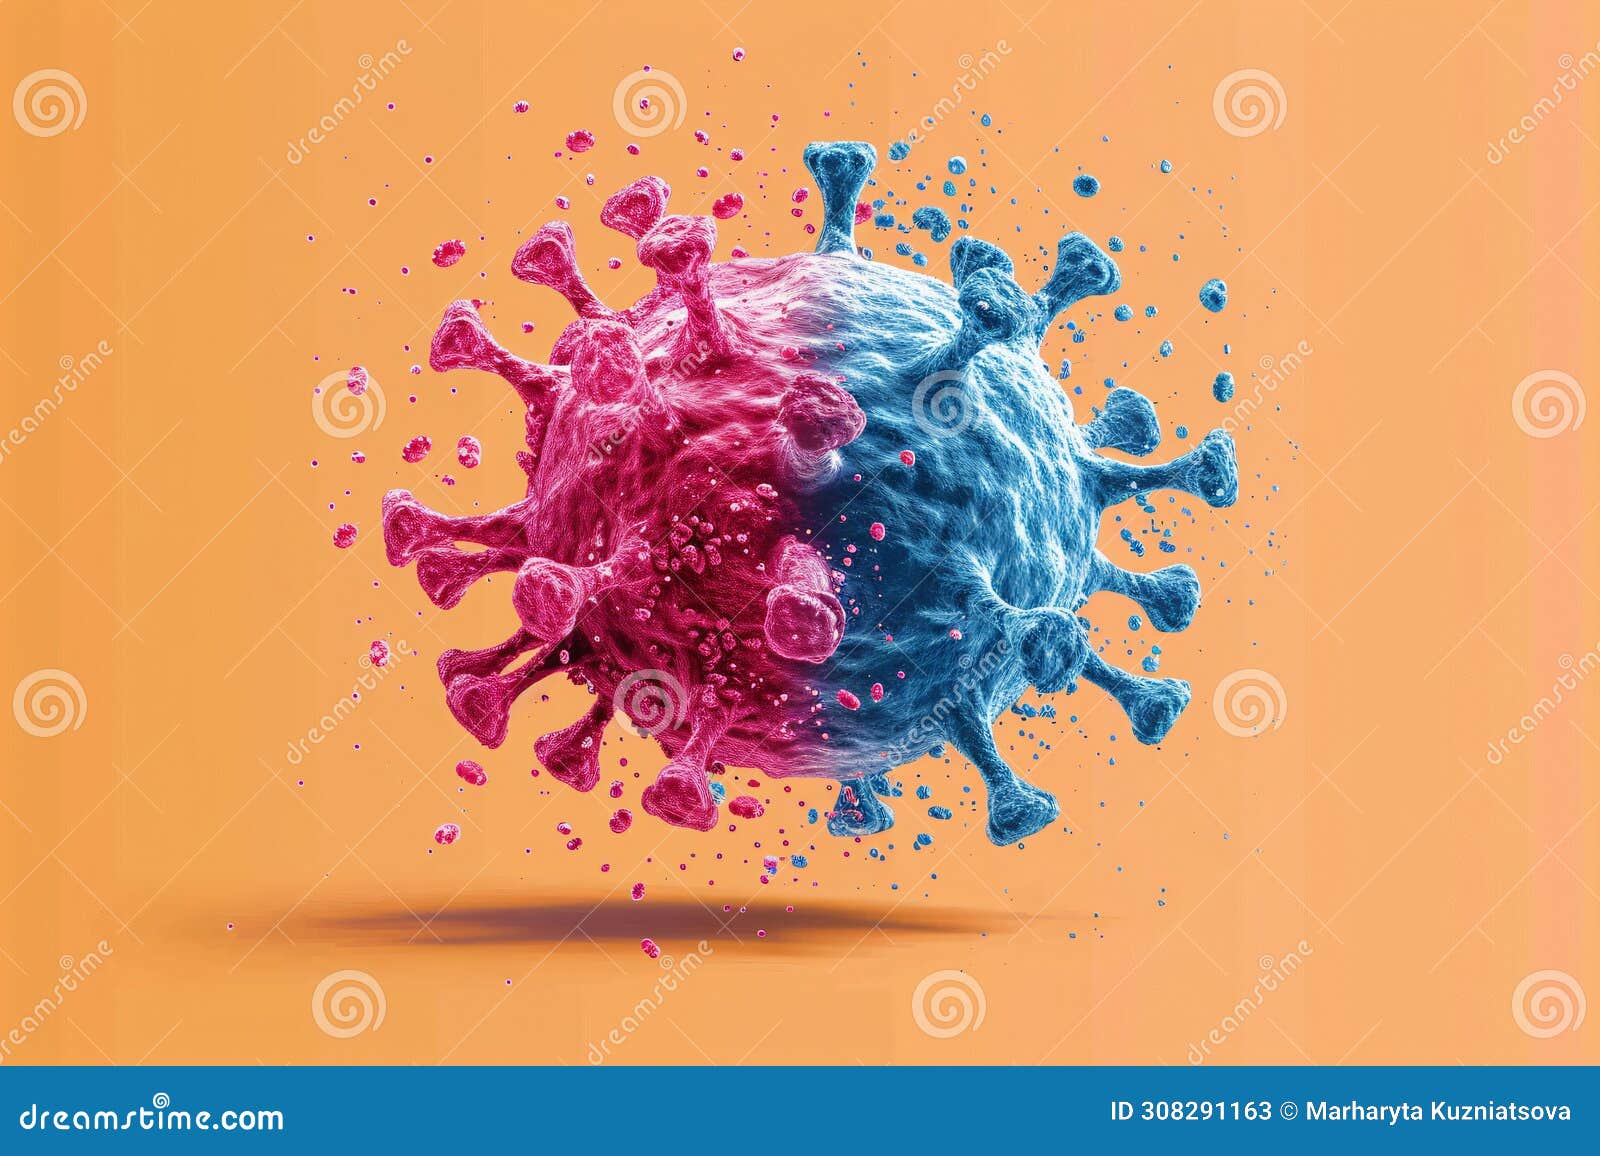 tumor microenvironment background with cancer cells, t-cells, nanoparticles, molecules and blood vessels